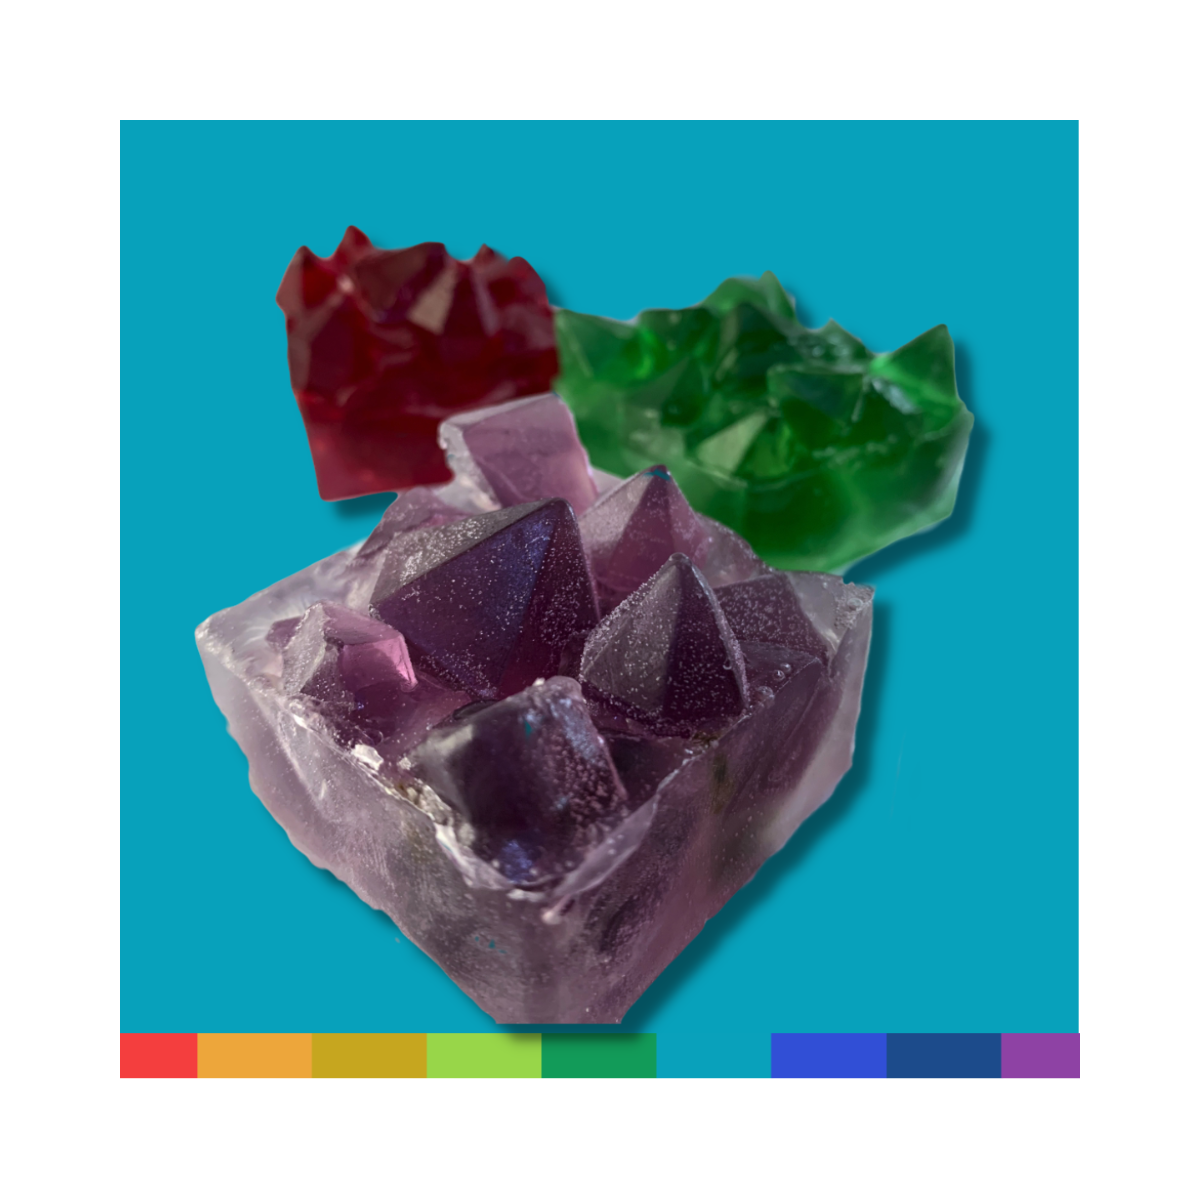 Gem Stones Boxed Soap - Available in Three Hues